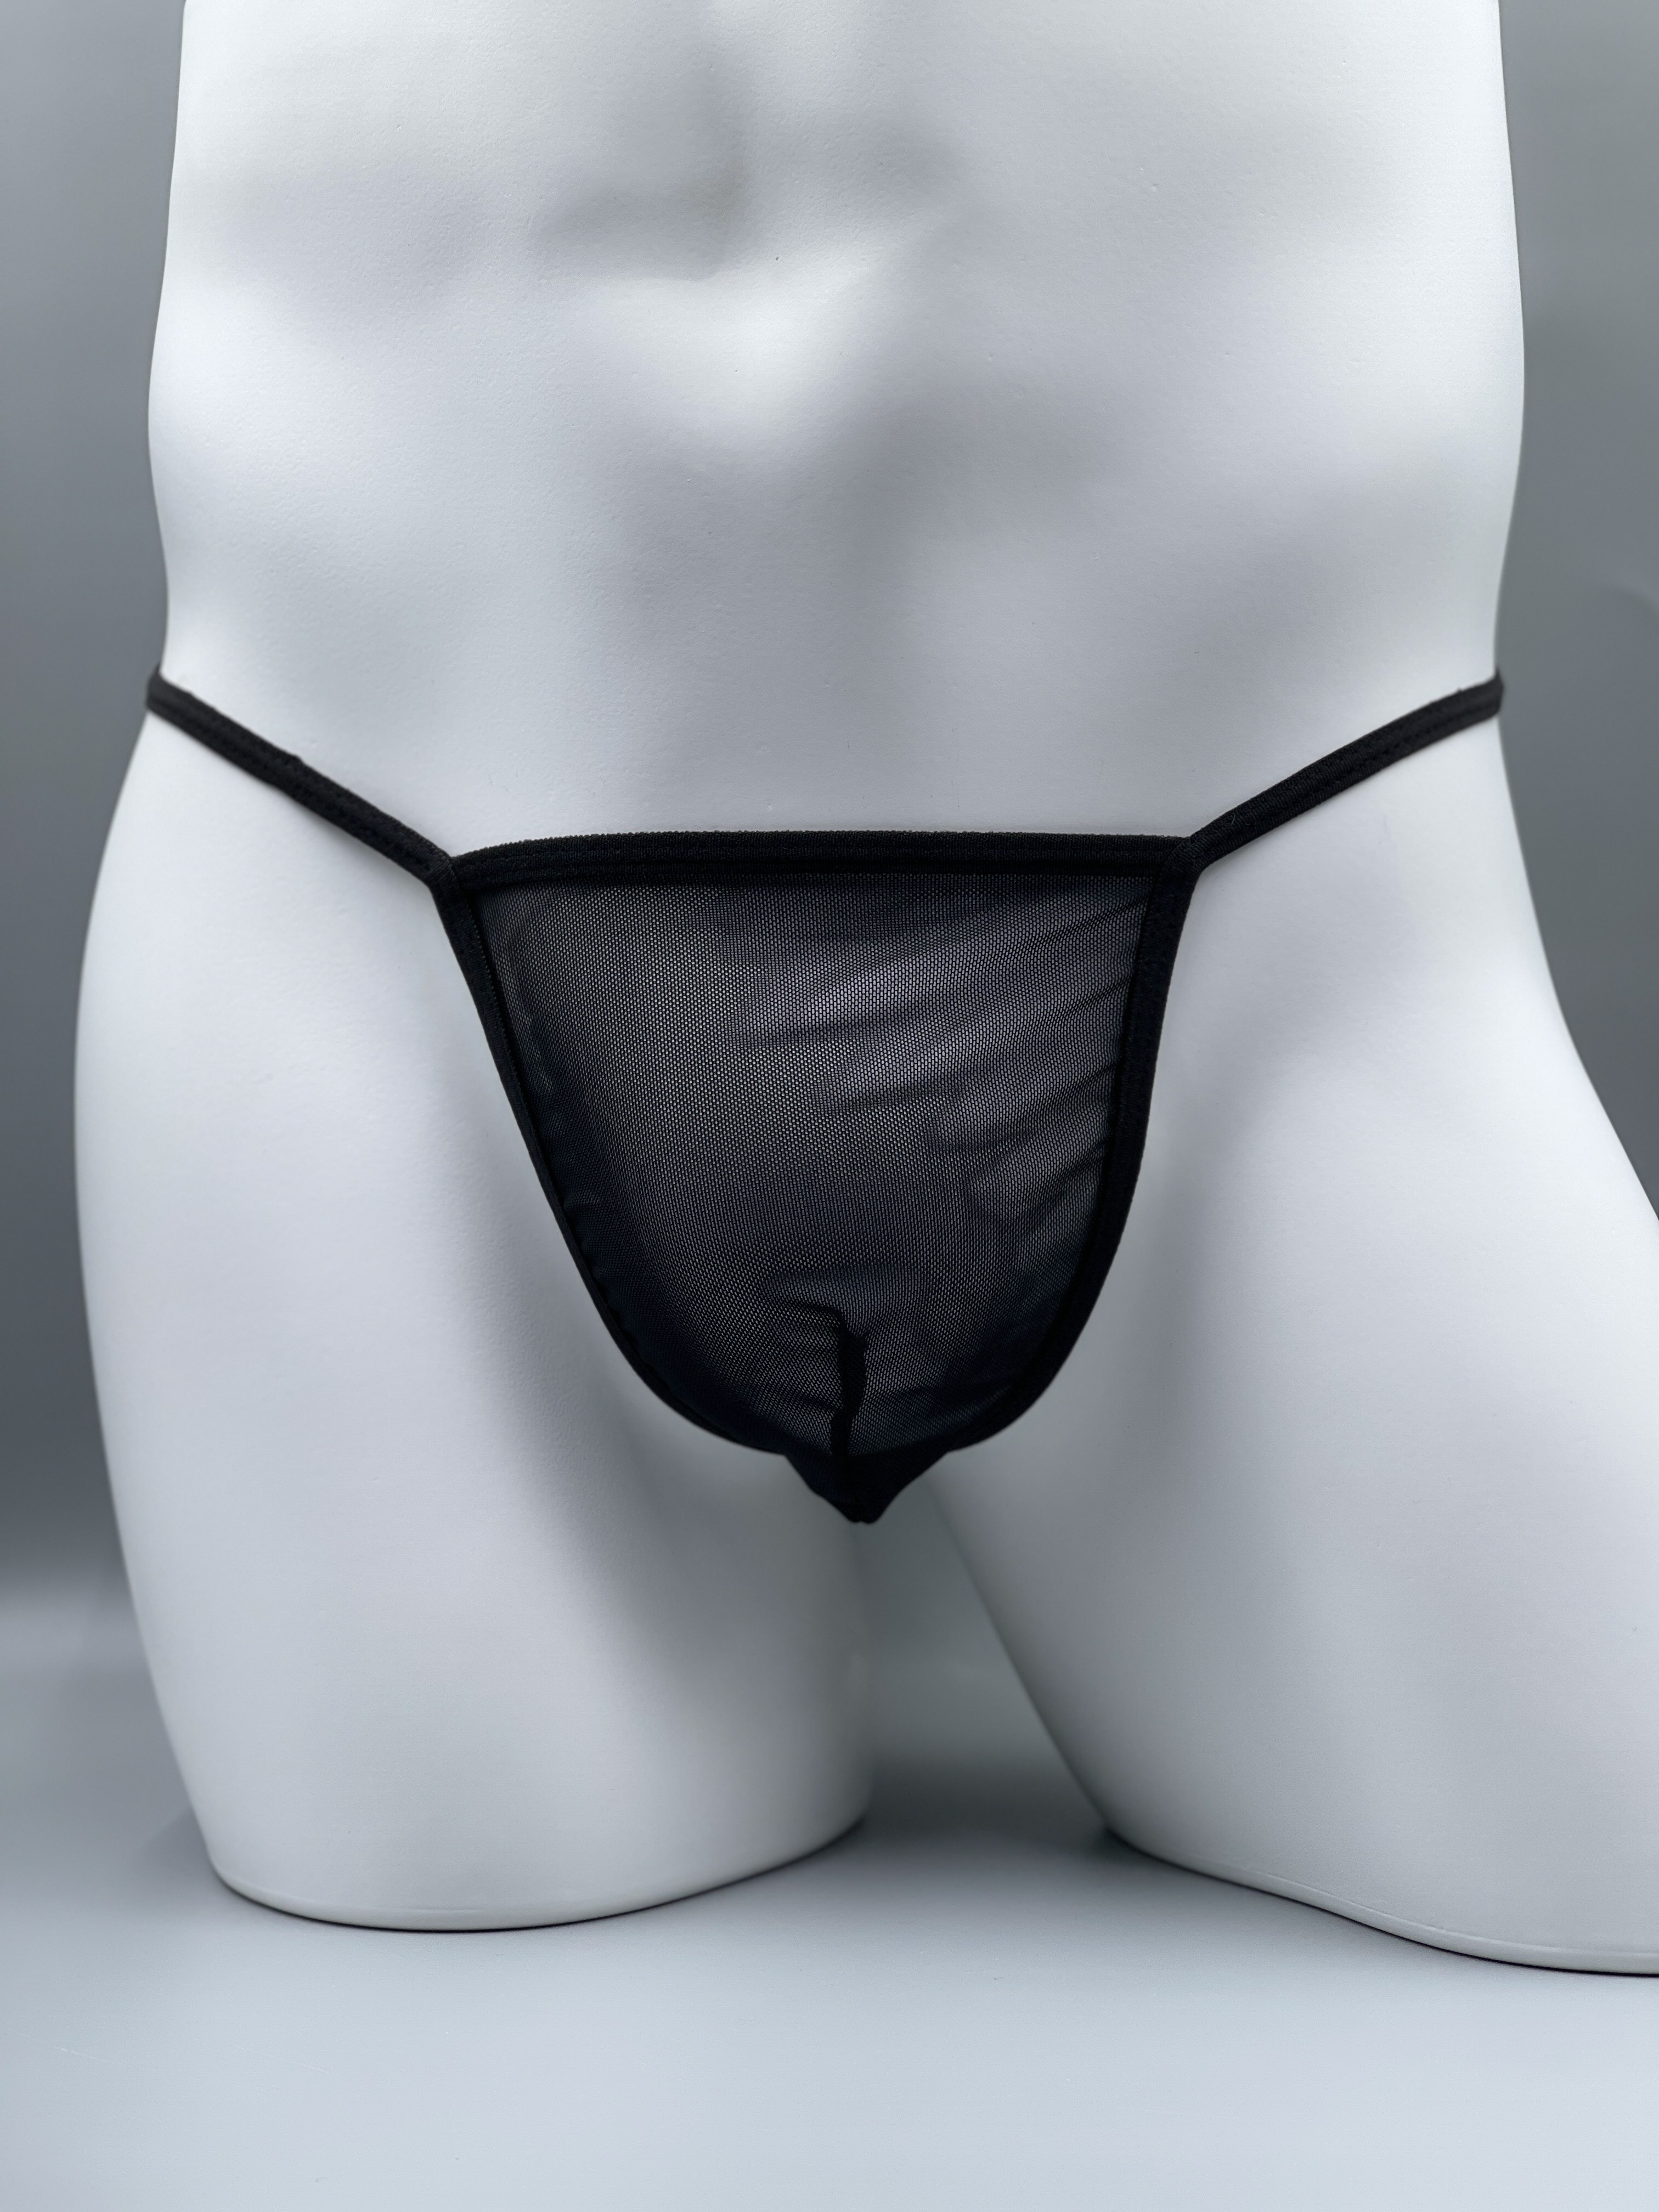 Exploring Fetish and BDSM Themes in Men's Thong Underwear